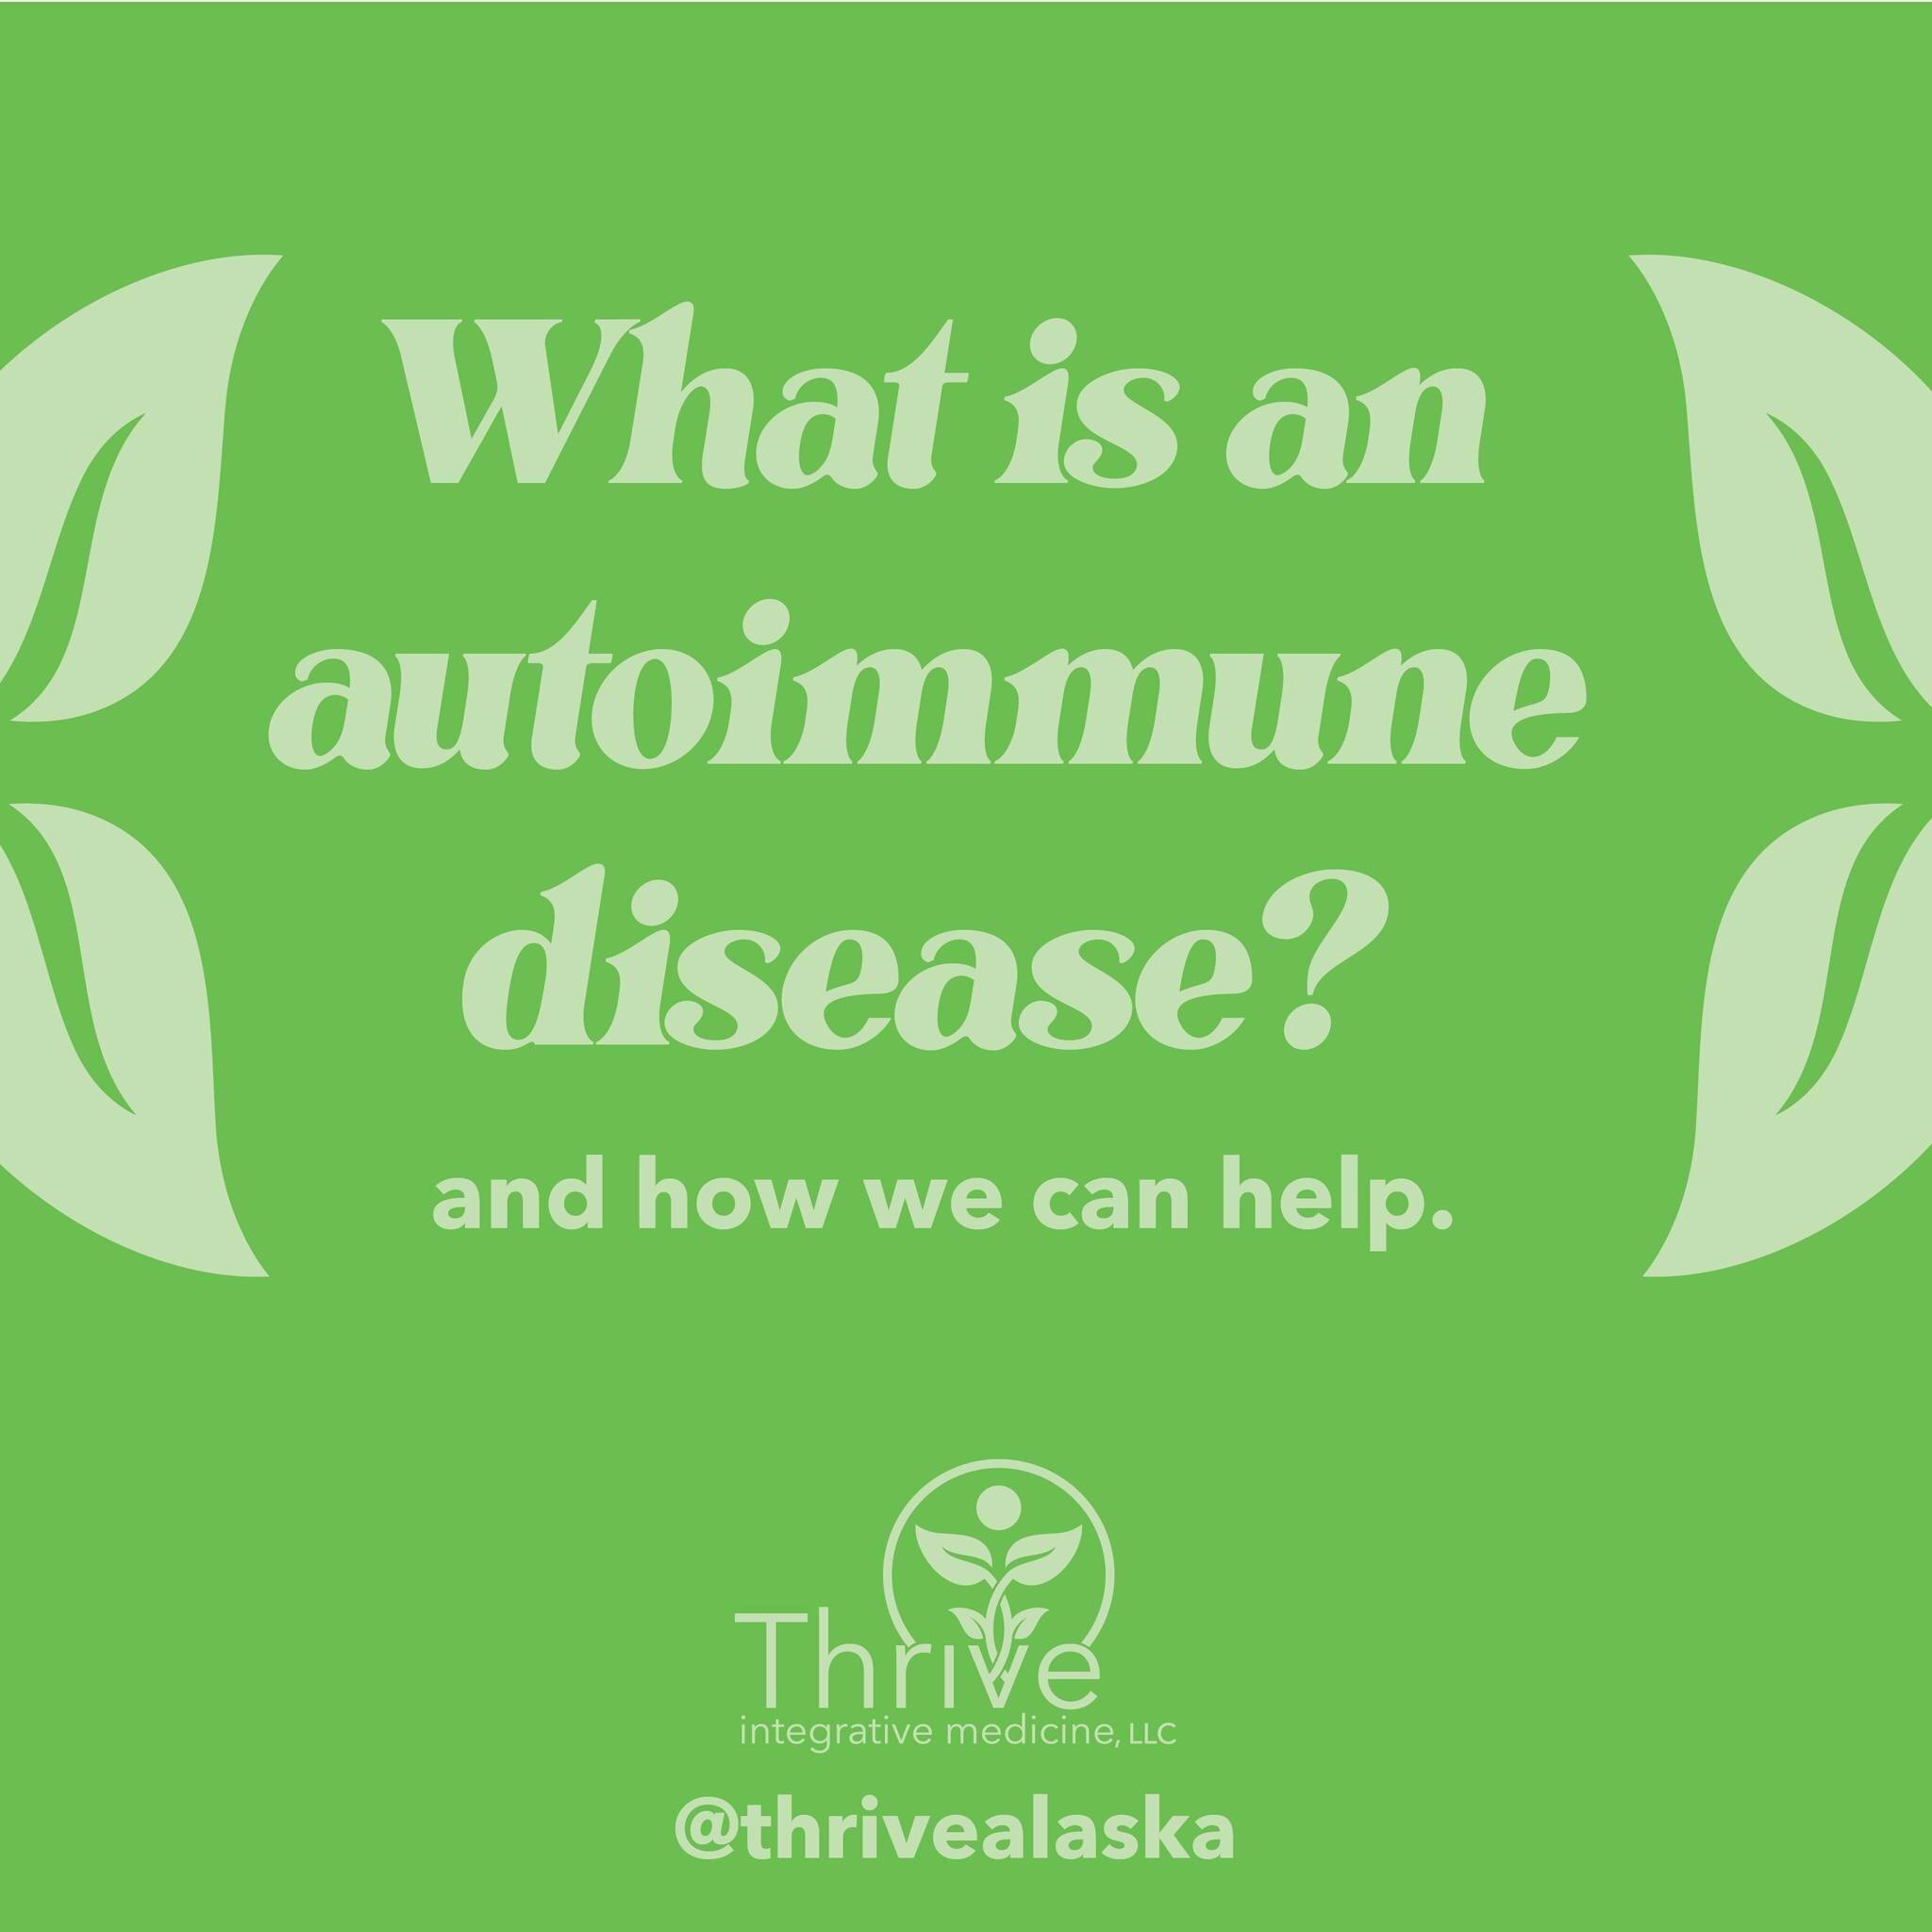 Autoimmune diseases occur when the immune system mistakenly attacks the body's own cells, tissues, and organs. There are more than 80 known types of autoimmune diseases, affecting various parts of the body. Here's a list of some common autoimmune dis